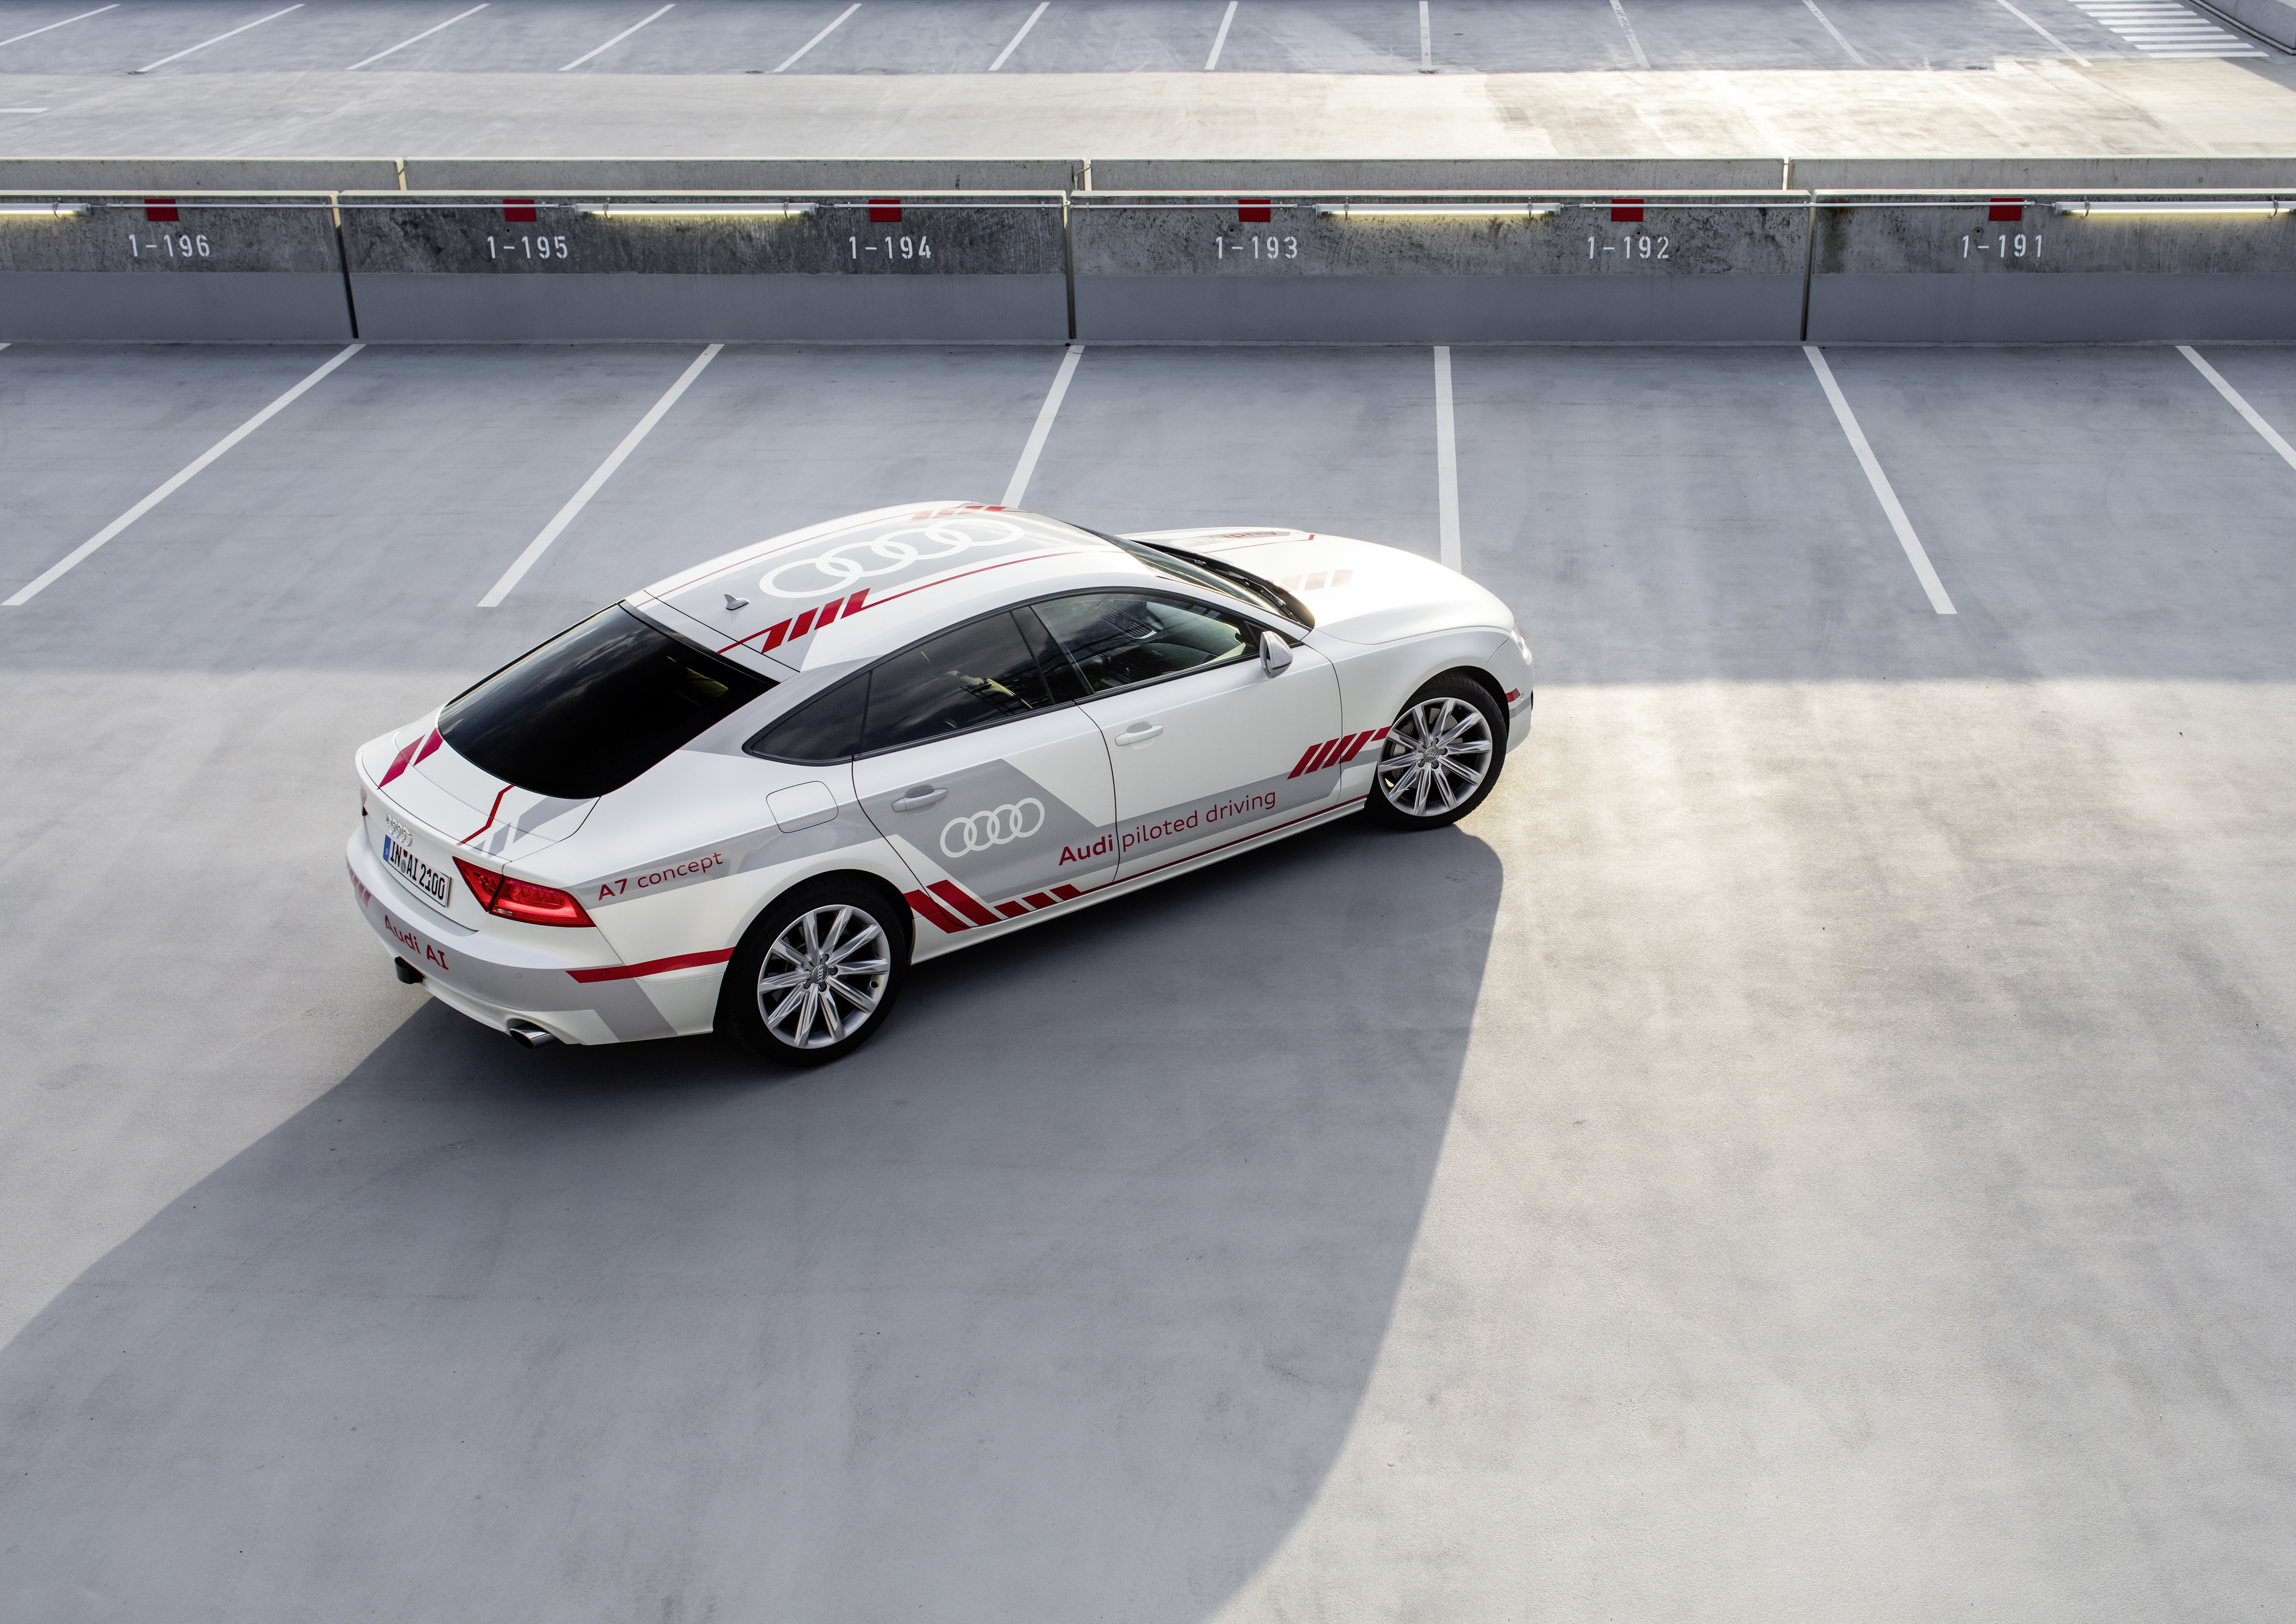 audi beyond initiative a7 piloted driving concept